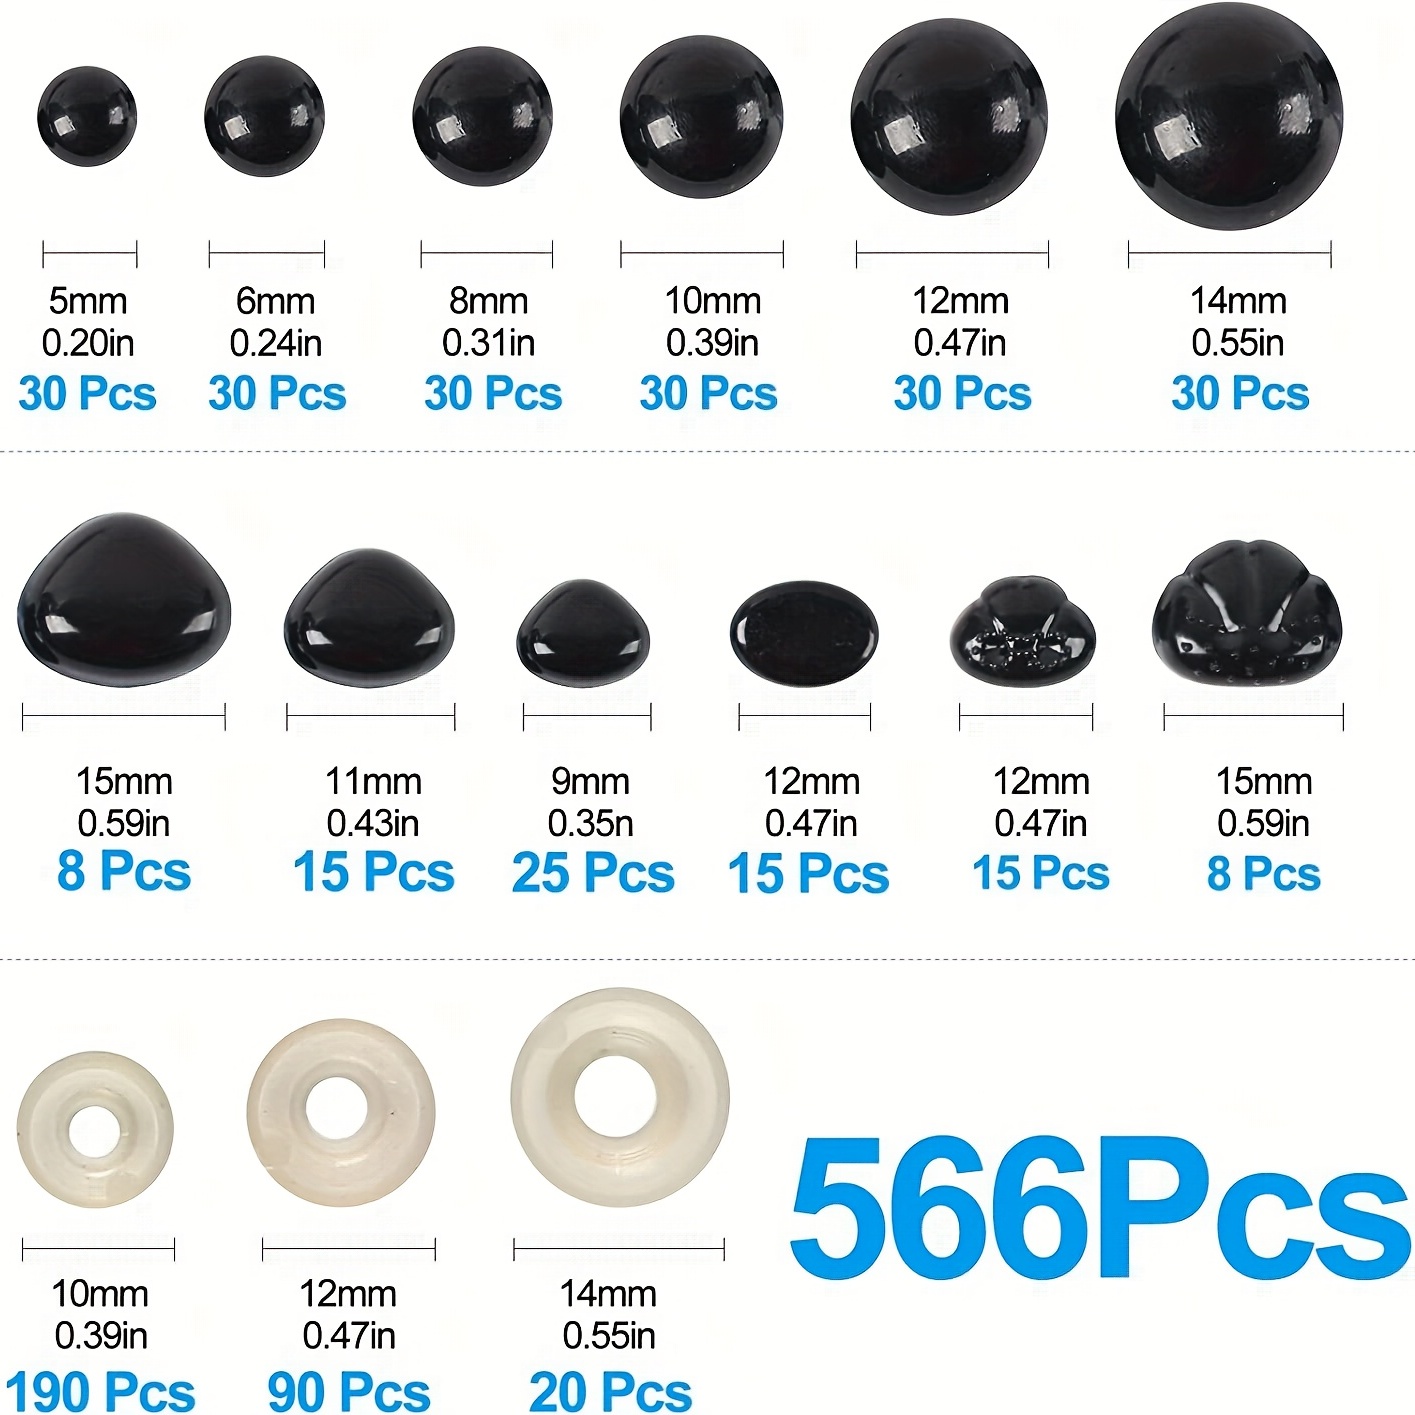 8x12mm Solid Black Oval Safety Eyes/noses With Washers: 2 Pair